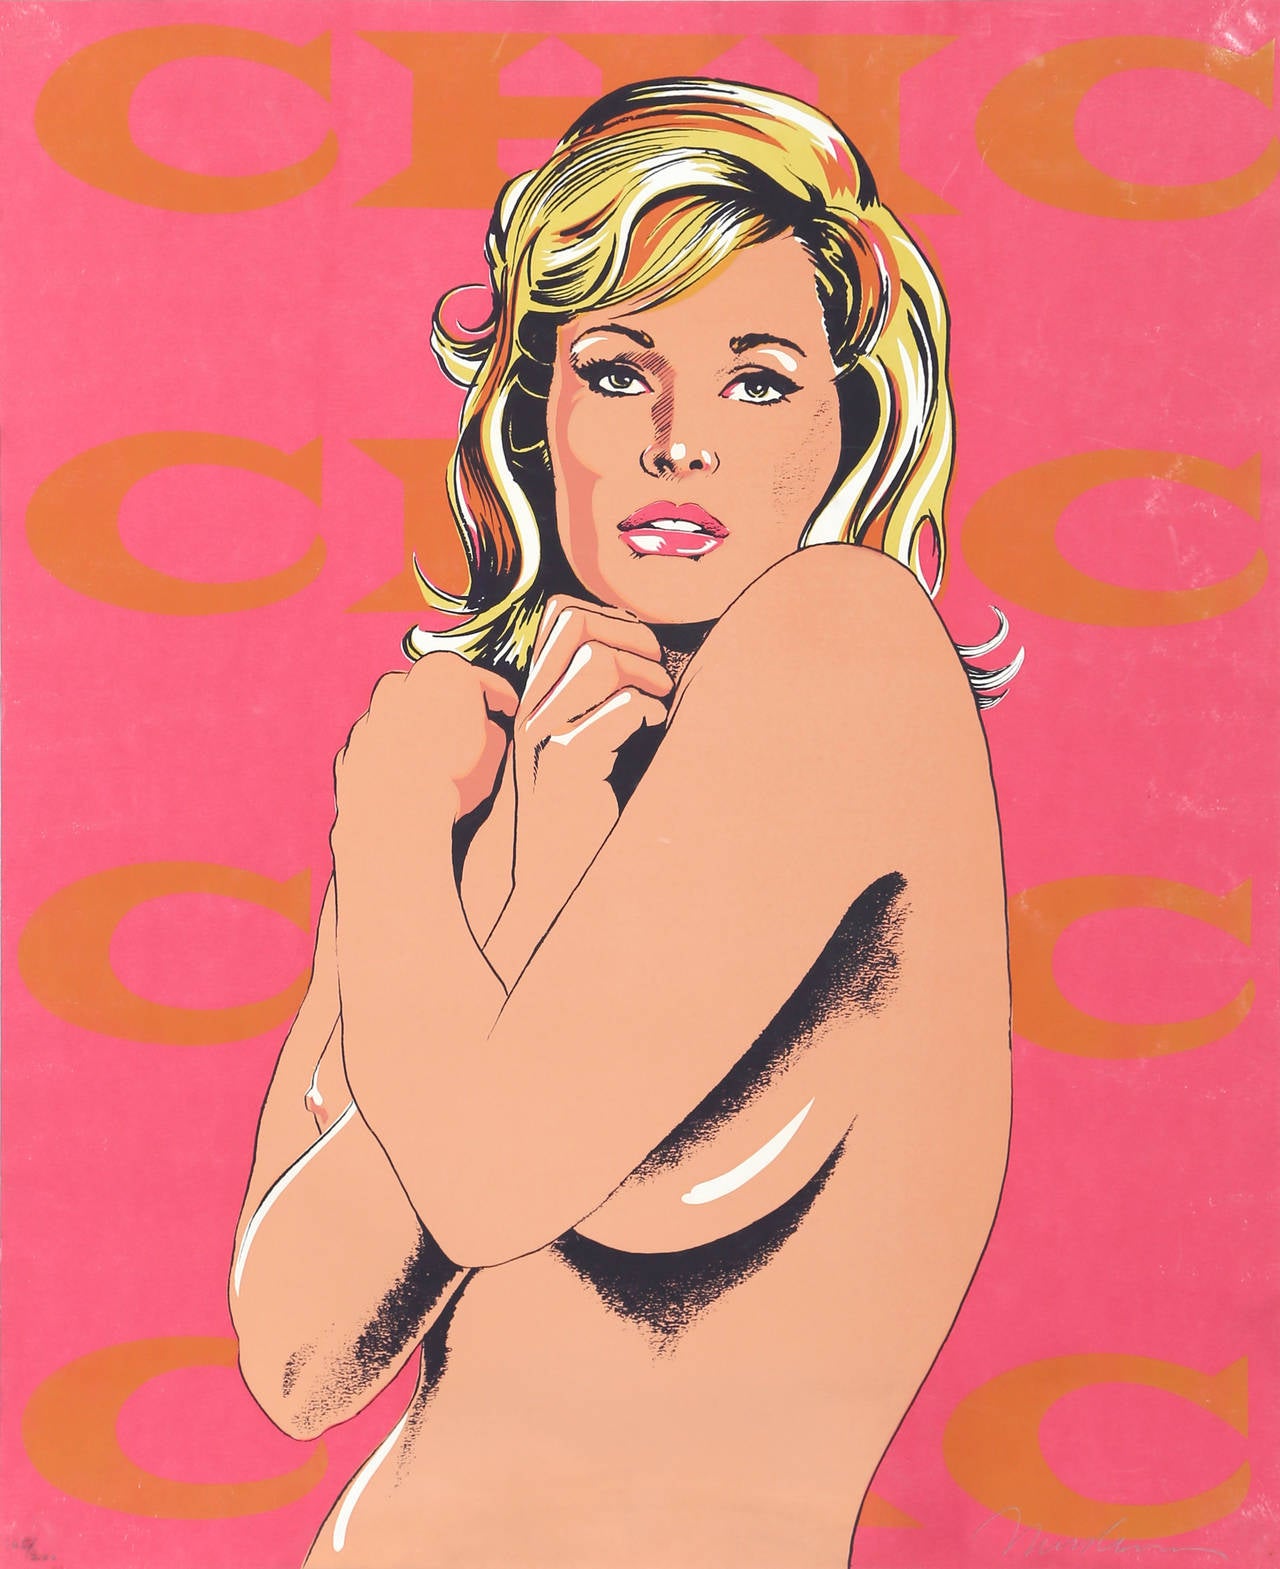 Artist: Mel Ramos, American (1935 - )
Title: Chic from 11 Pop Artists
Year: 1965
Medium: Silkscreen, signed and numbered in pencil
Edition: 200, XXII/L
Size: 24 x 19.5 in. (60.96 x 49.53 cm)

Knickerbocker Machine and Foundry, Inc., New